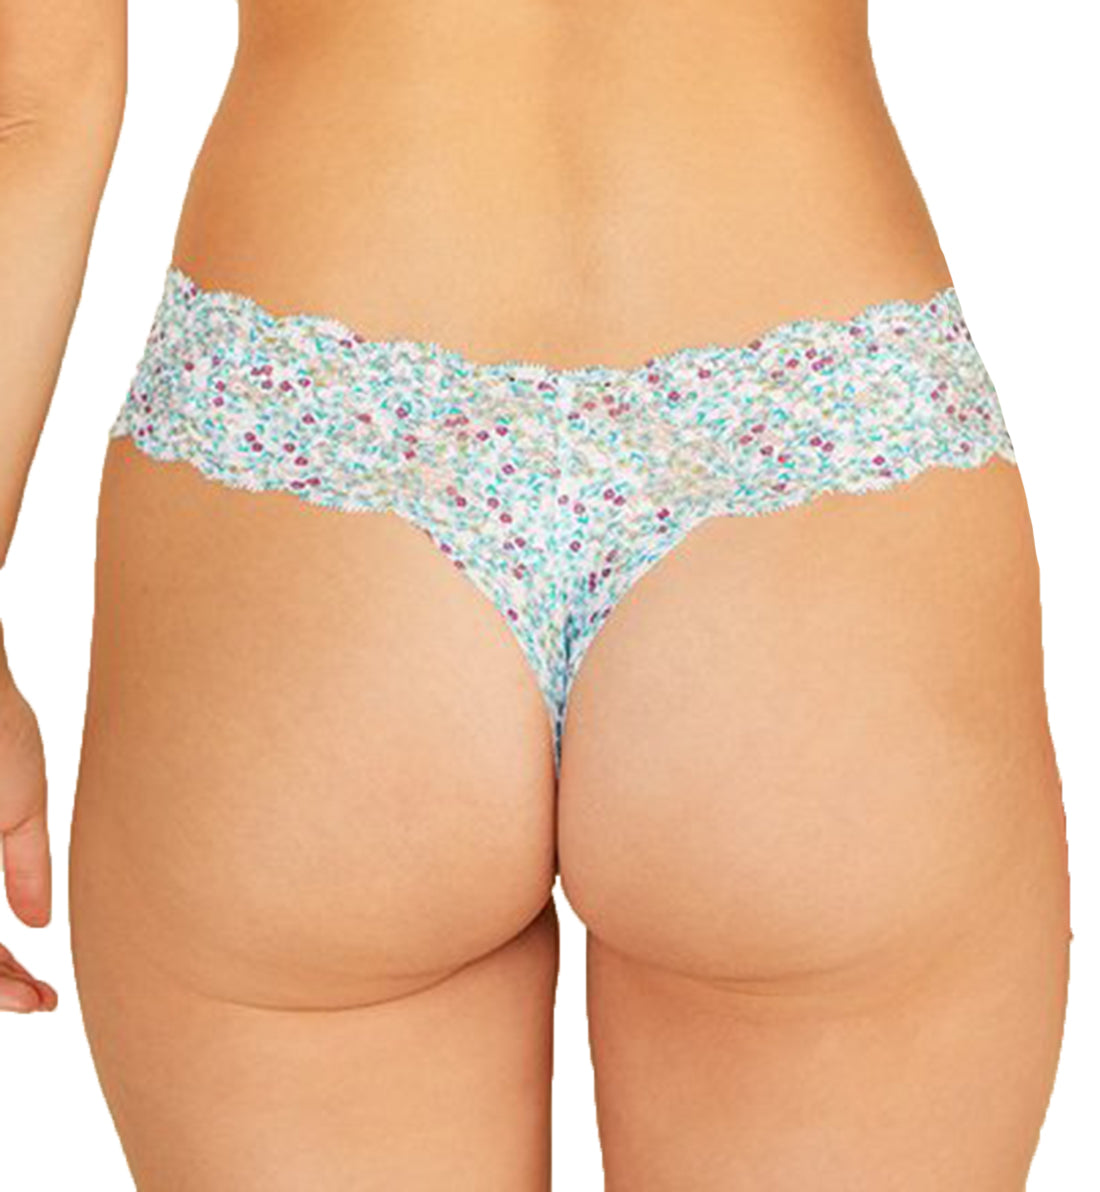 Cosabella Never Say Never Printed Cutie Thong (NEVEP0321),Floral Blu Venezia - Floral Blu Venezia,One Size